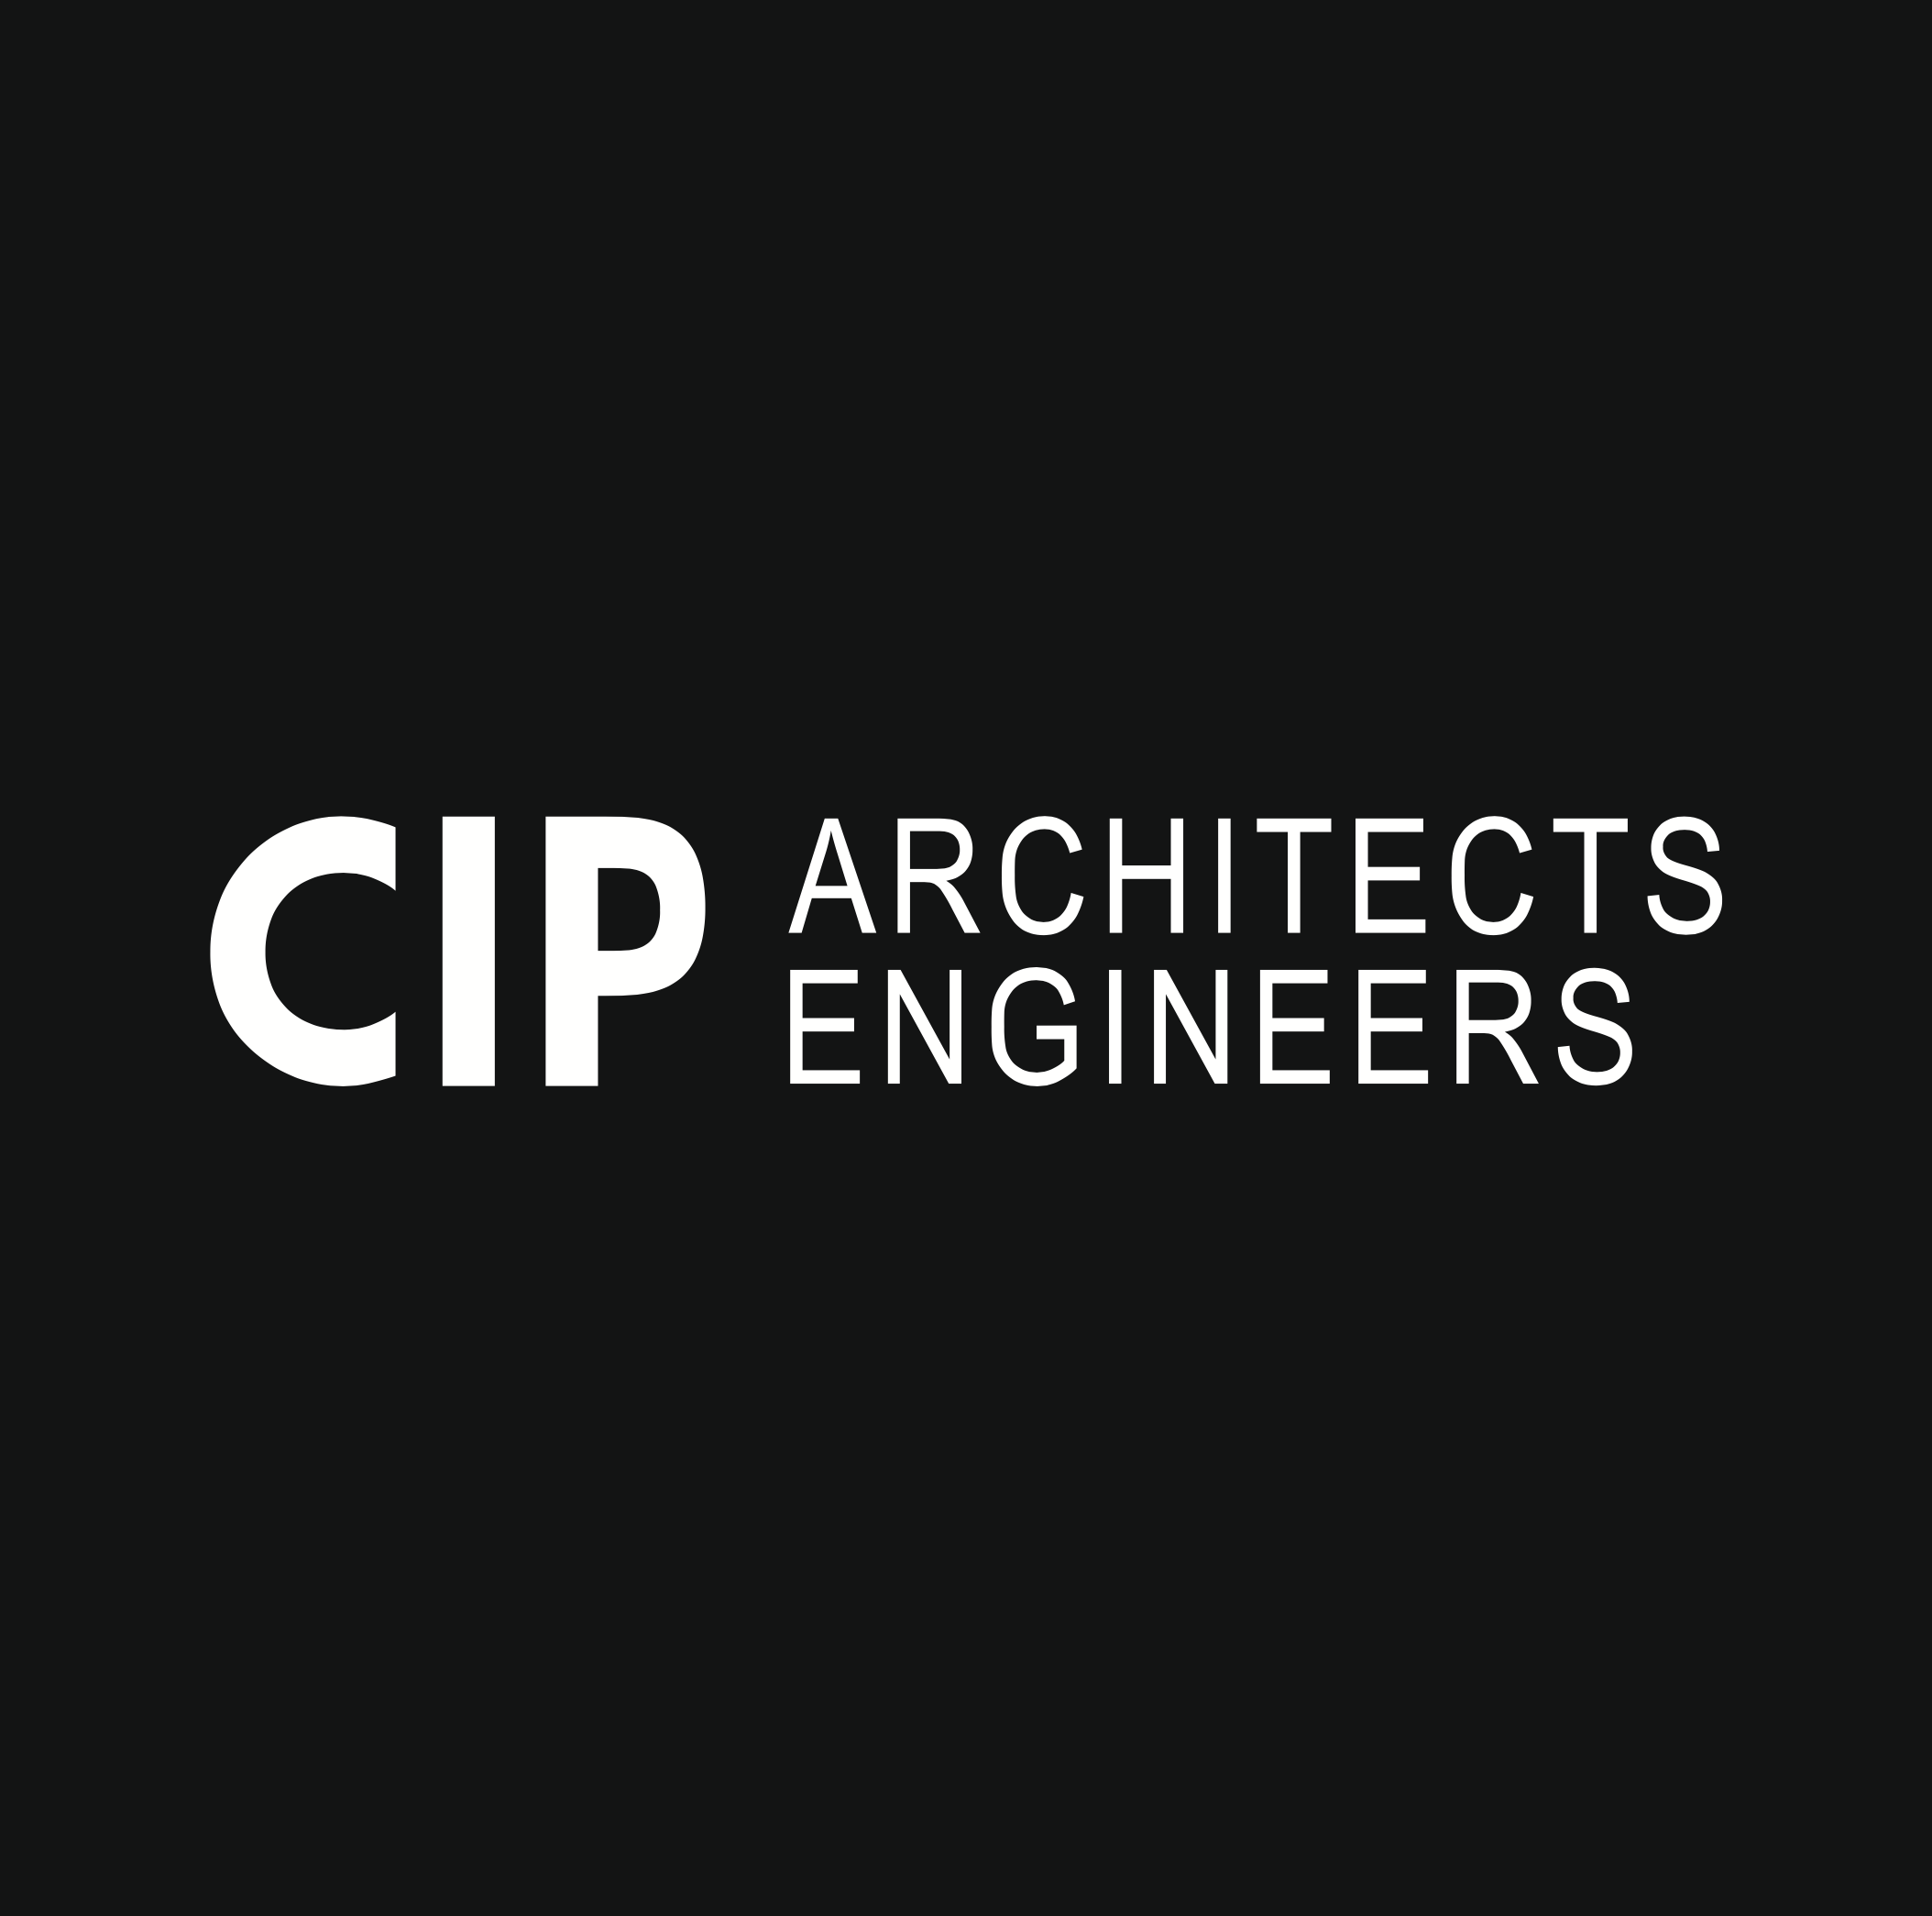 CIP architects engineers sp. z o.o.